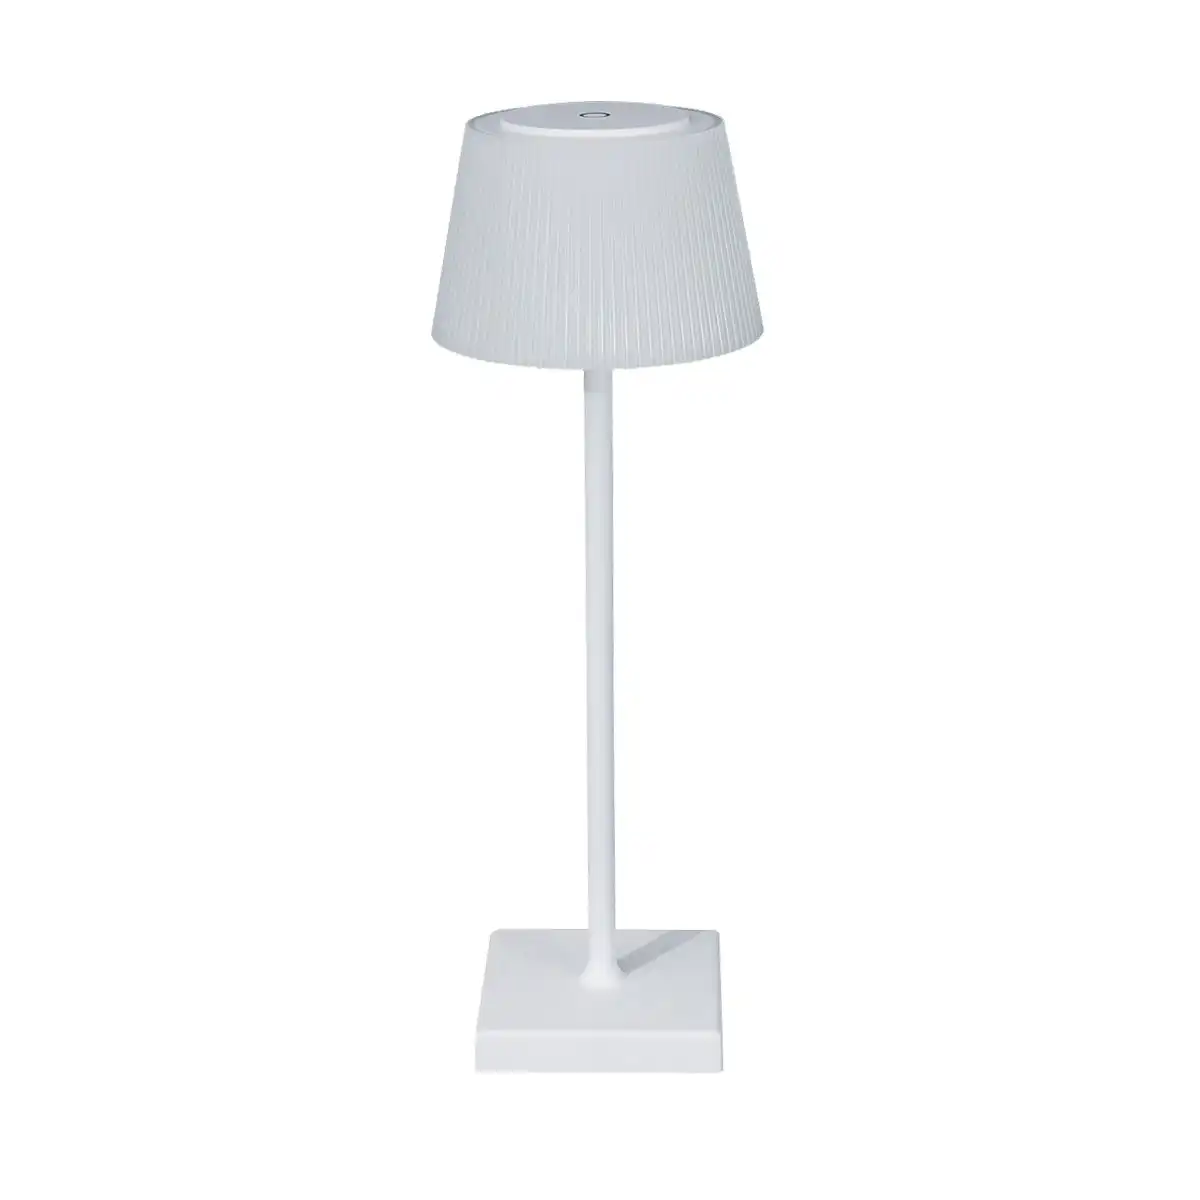 Cafe Lighting Tate Rechargeable LED Touch Lamp - White